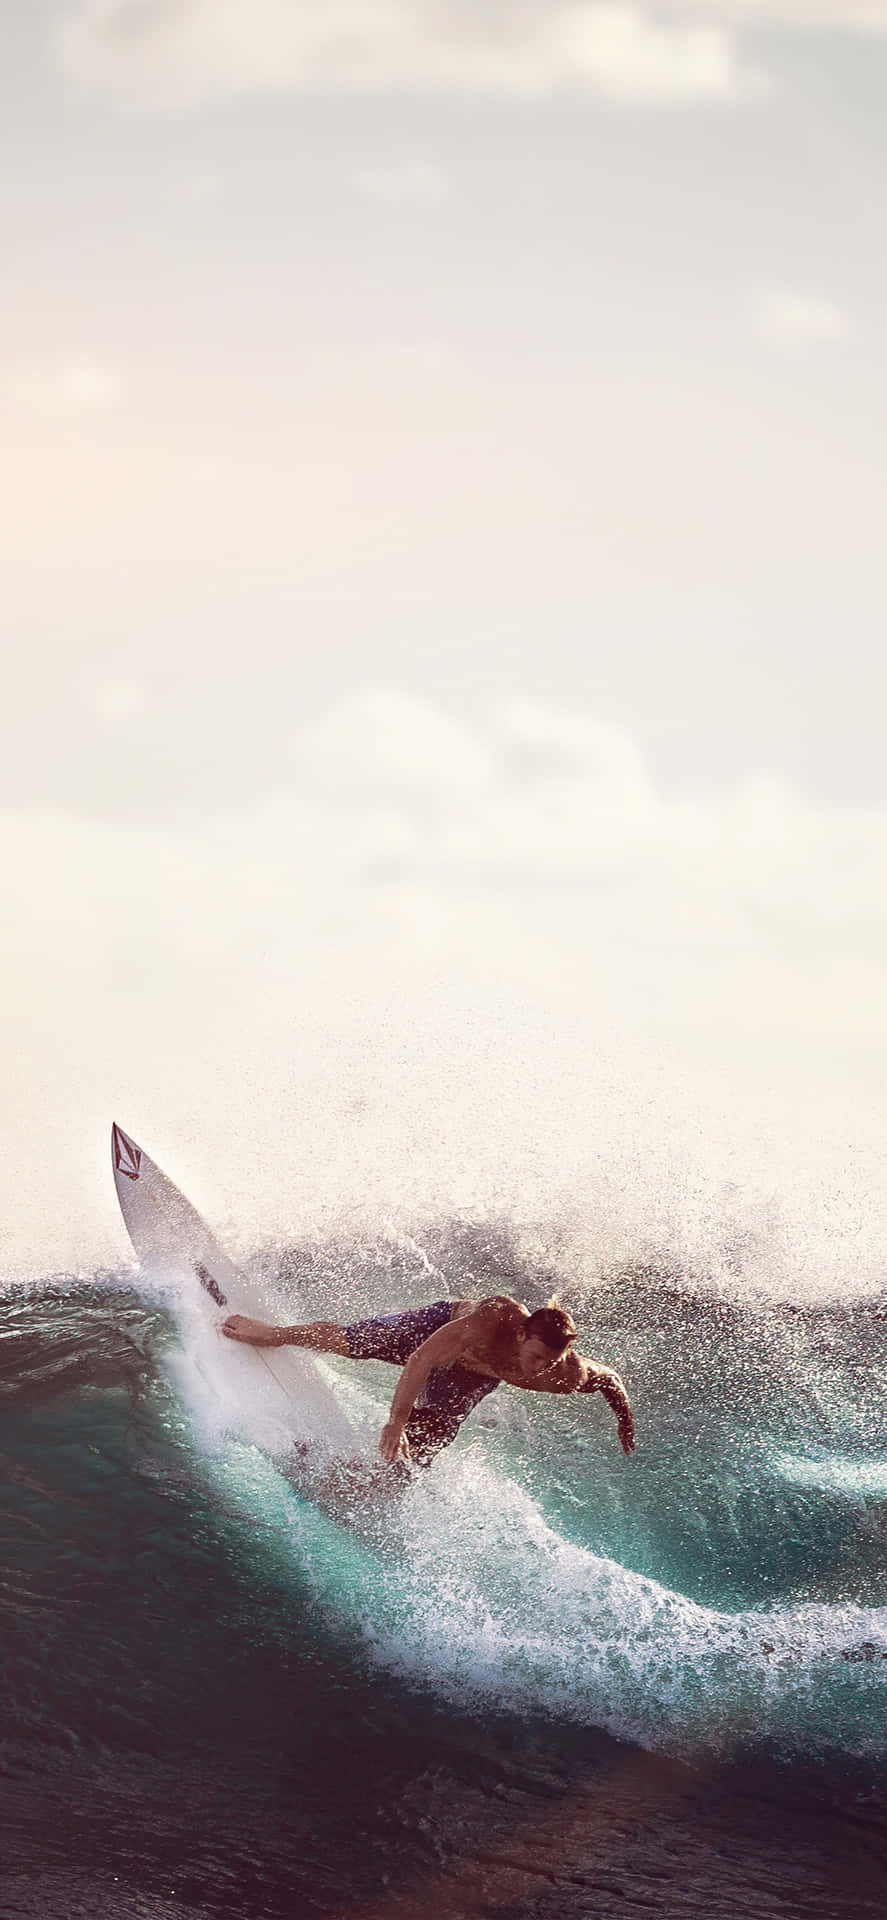 Catch That Wave! Wallpaper